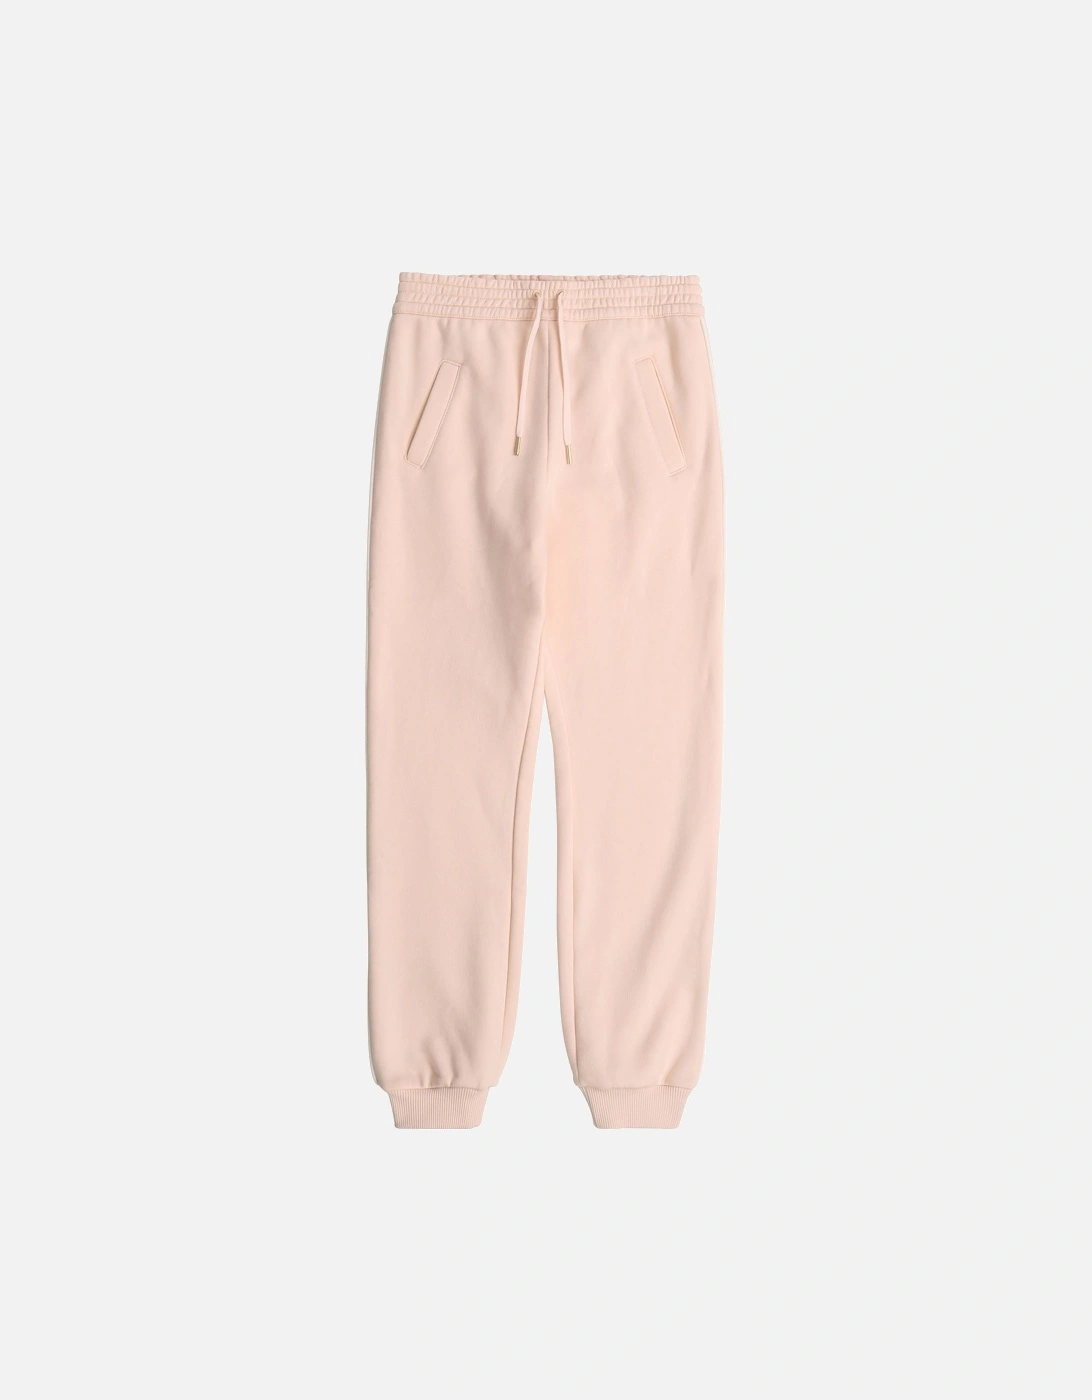 Chloe Girls Cotton Joggers Pink, 3 of 2